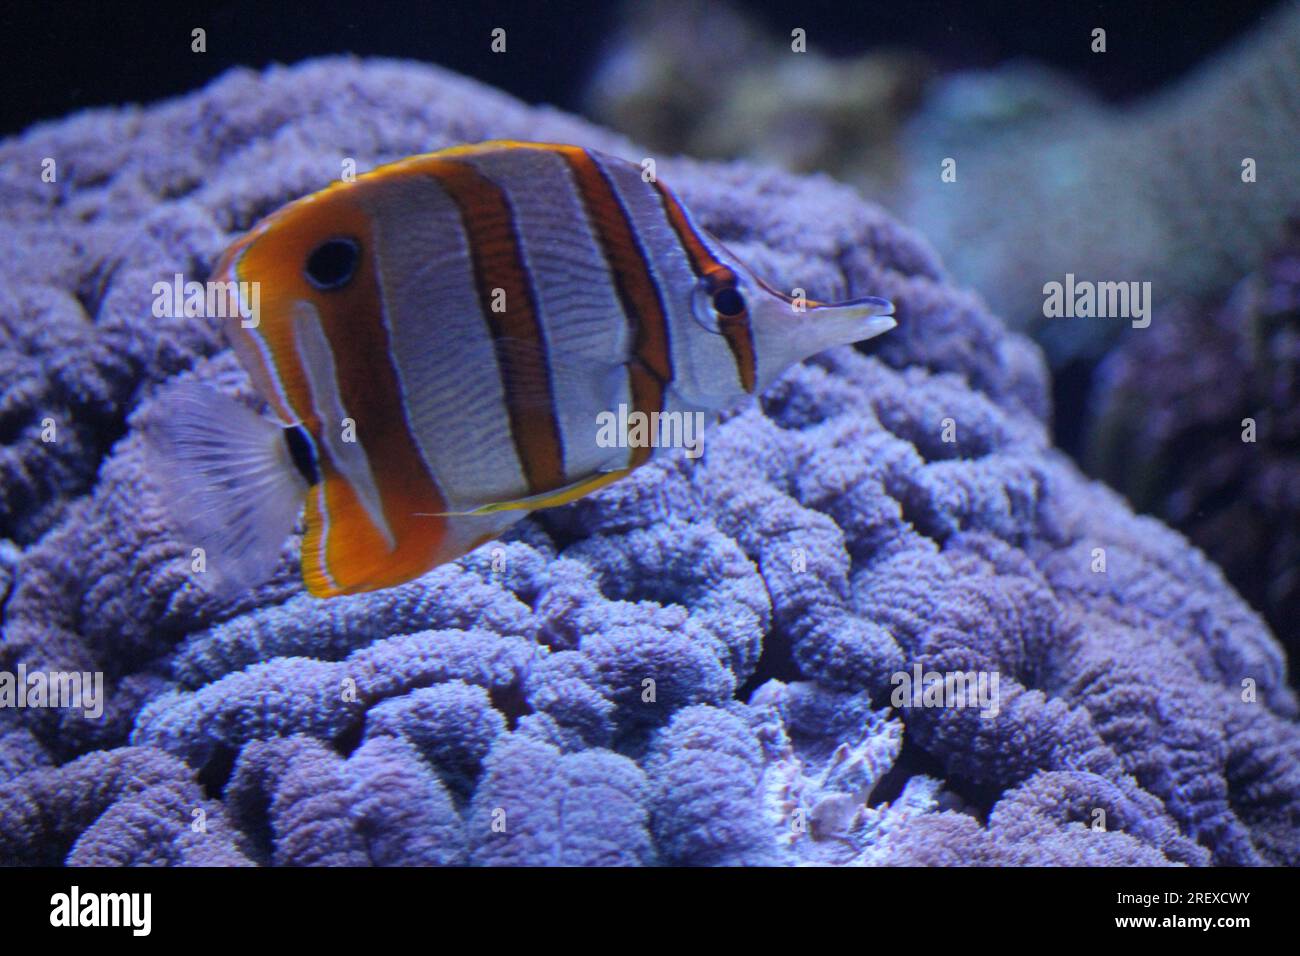 Copperband butterflyfish Stock Photo